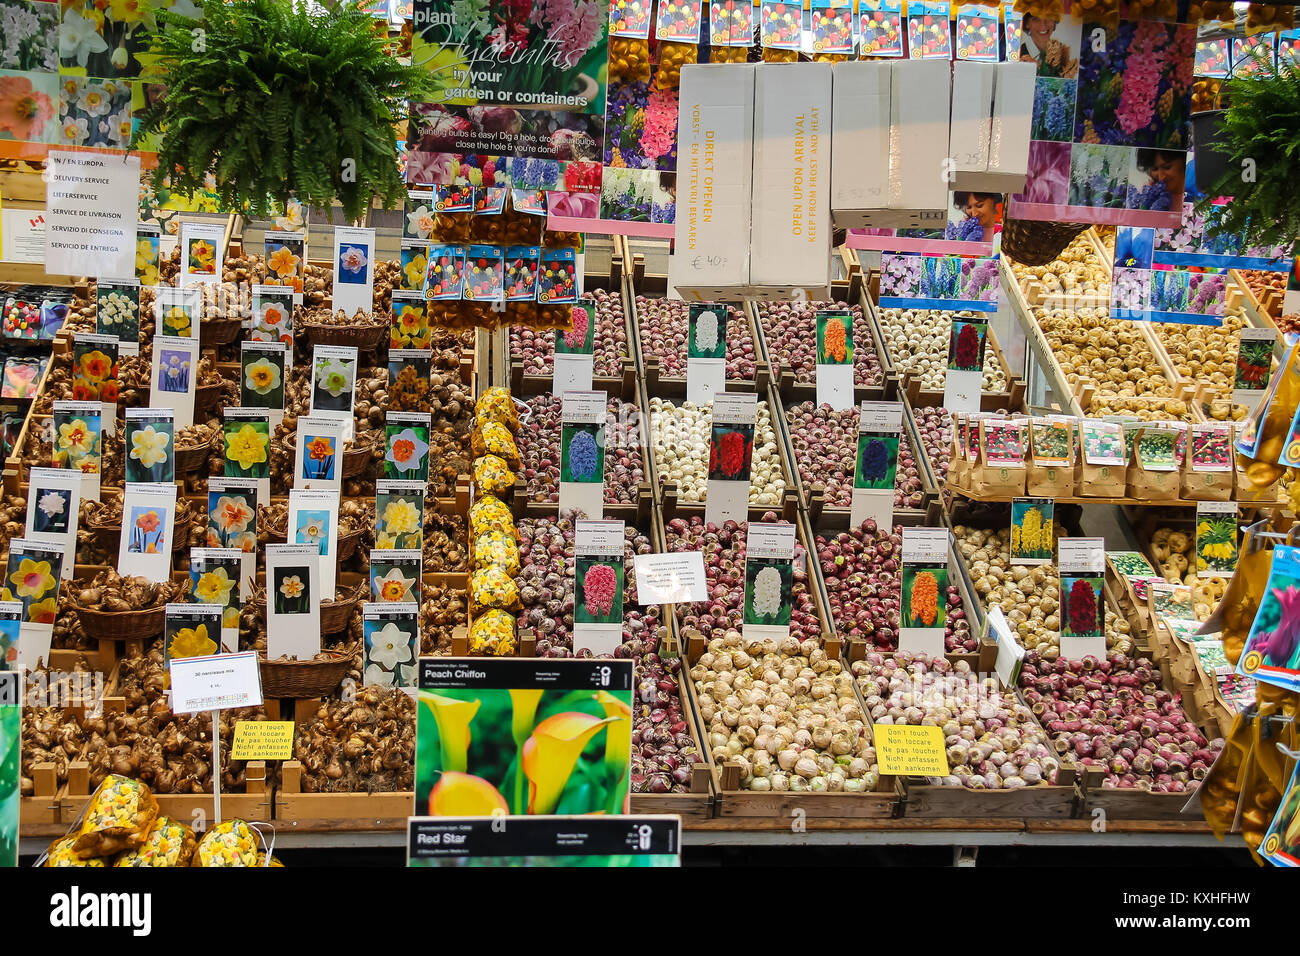 Amsterdam, the Netherlands - October 03, 2015: Flower seeds shop in the city center Stock Photo